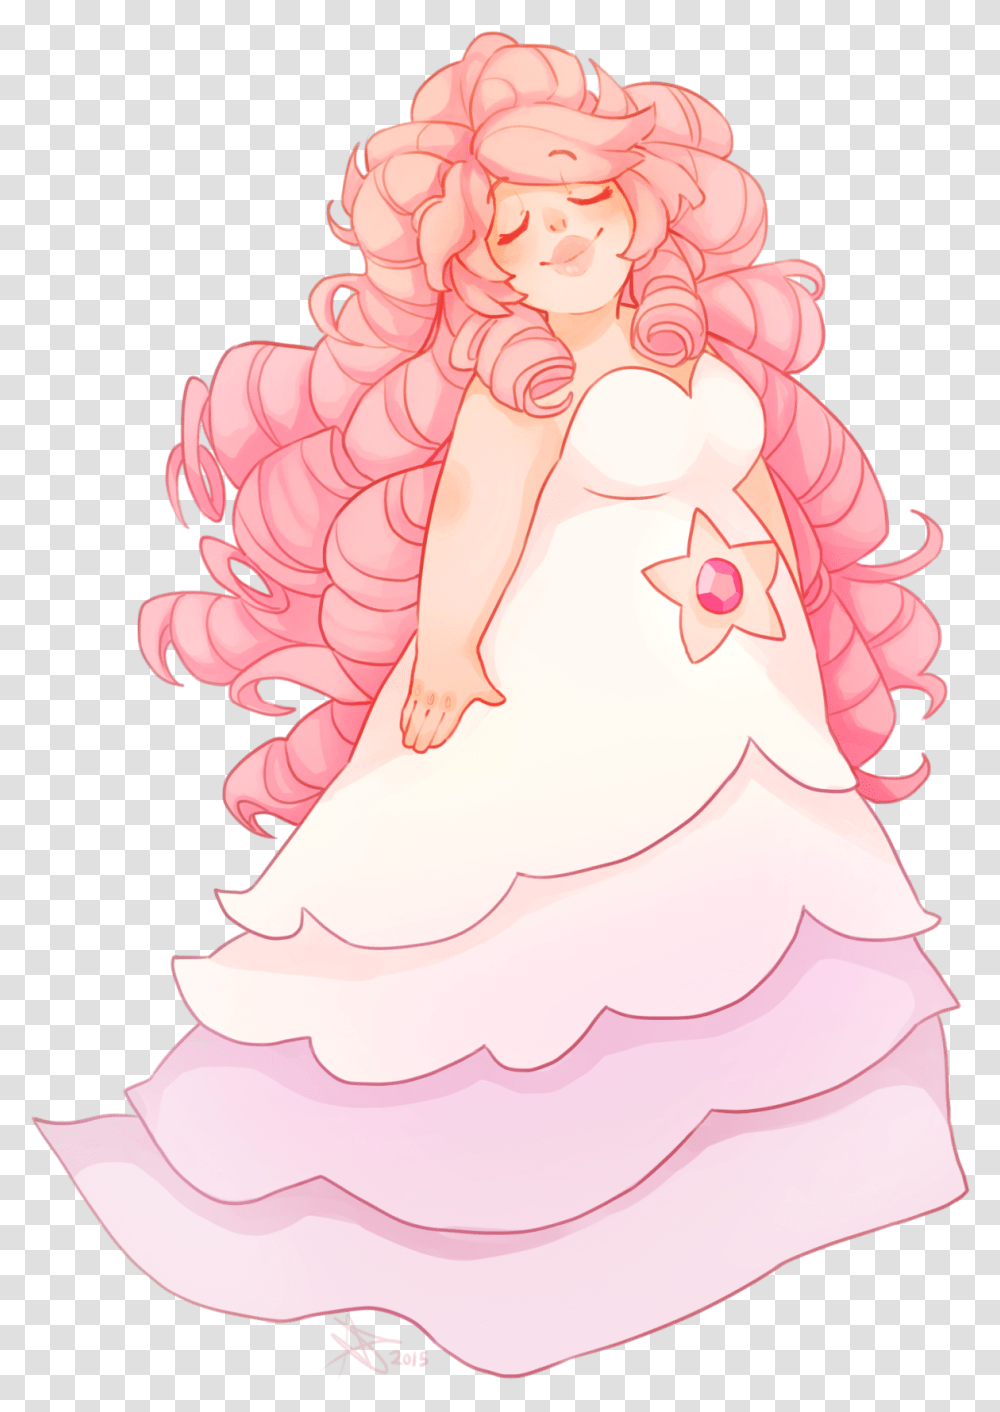 I Love Her Big Pink Curly Fluffy Hair Rose Quartz Hair Steven Universe, Person, Female, Leisure Activities Transparent Png